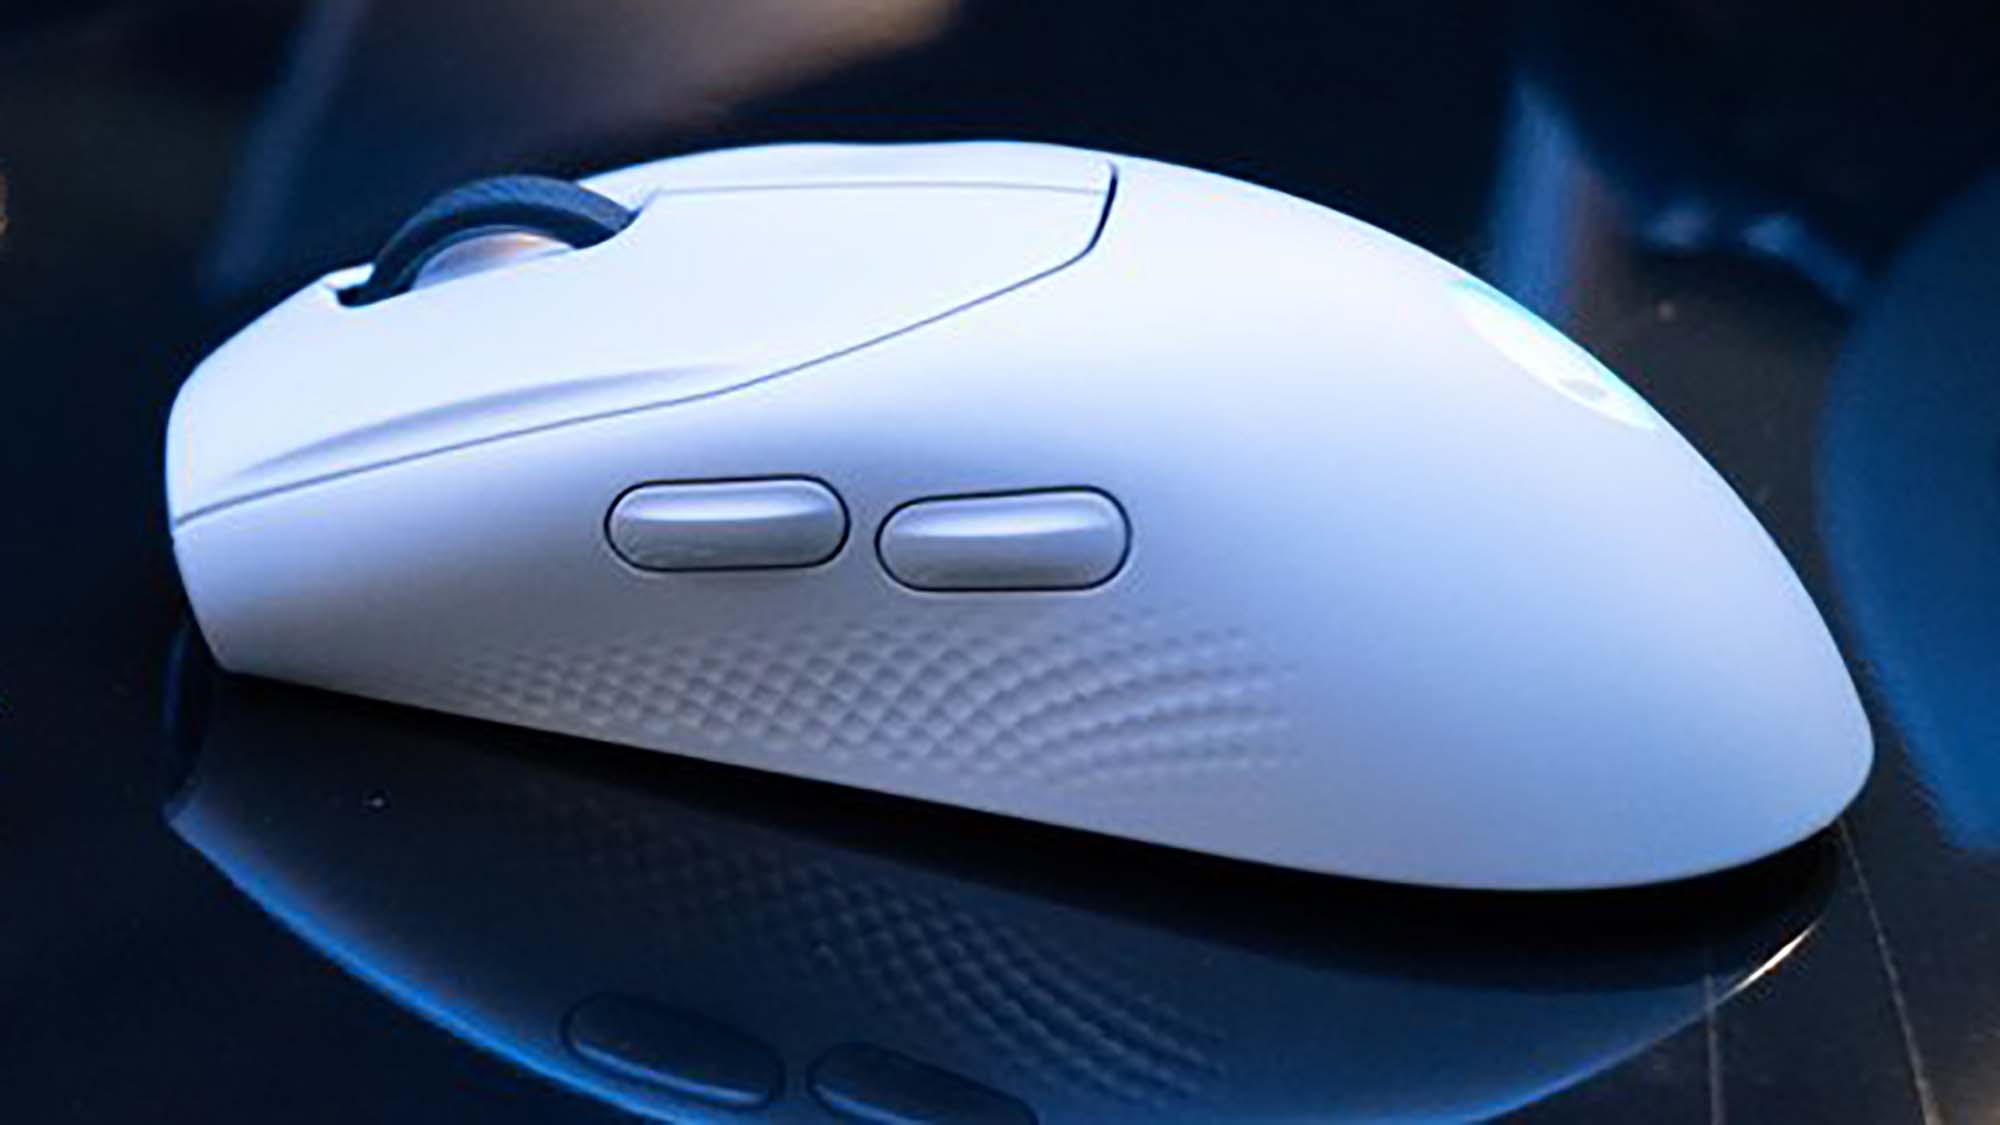 An Alienware Tri-Mode wireless gaming mouse on a reflective black surface in a darkened room